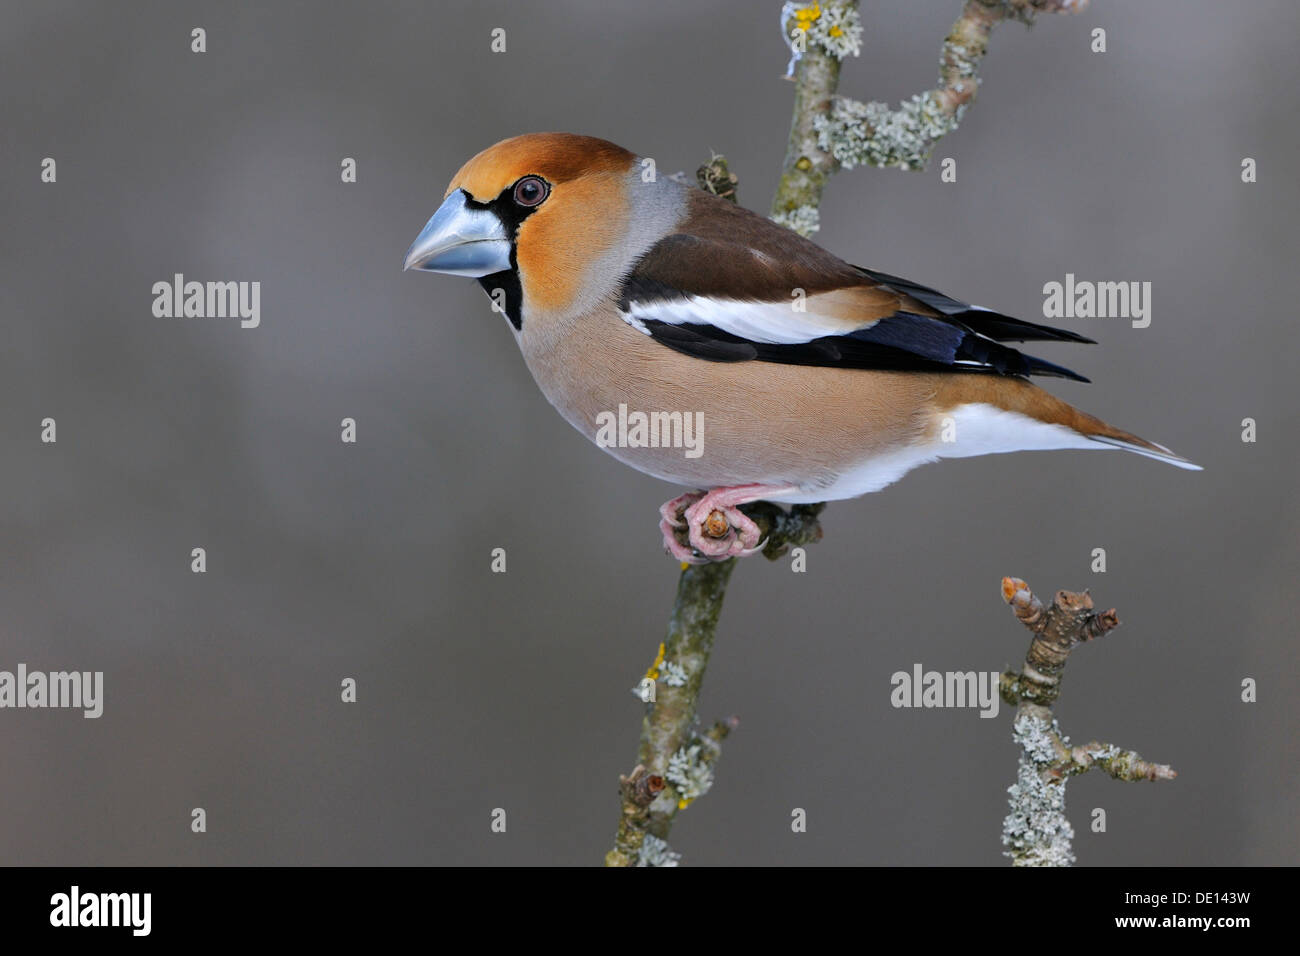 Hawfinch (Coccothraustes coccothraustes), male in breeding plumage, perched on apple tree branch, UNESCO Biosphere Reserve Stock Photo